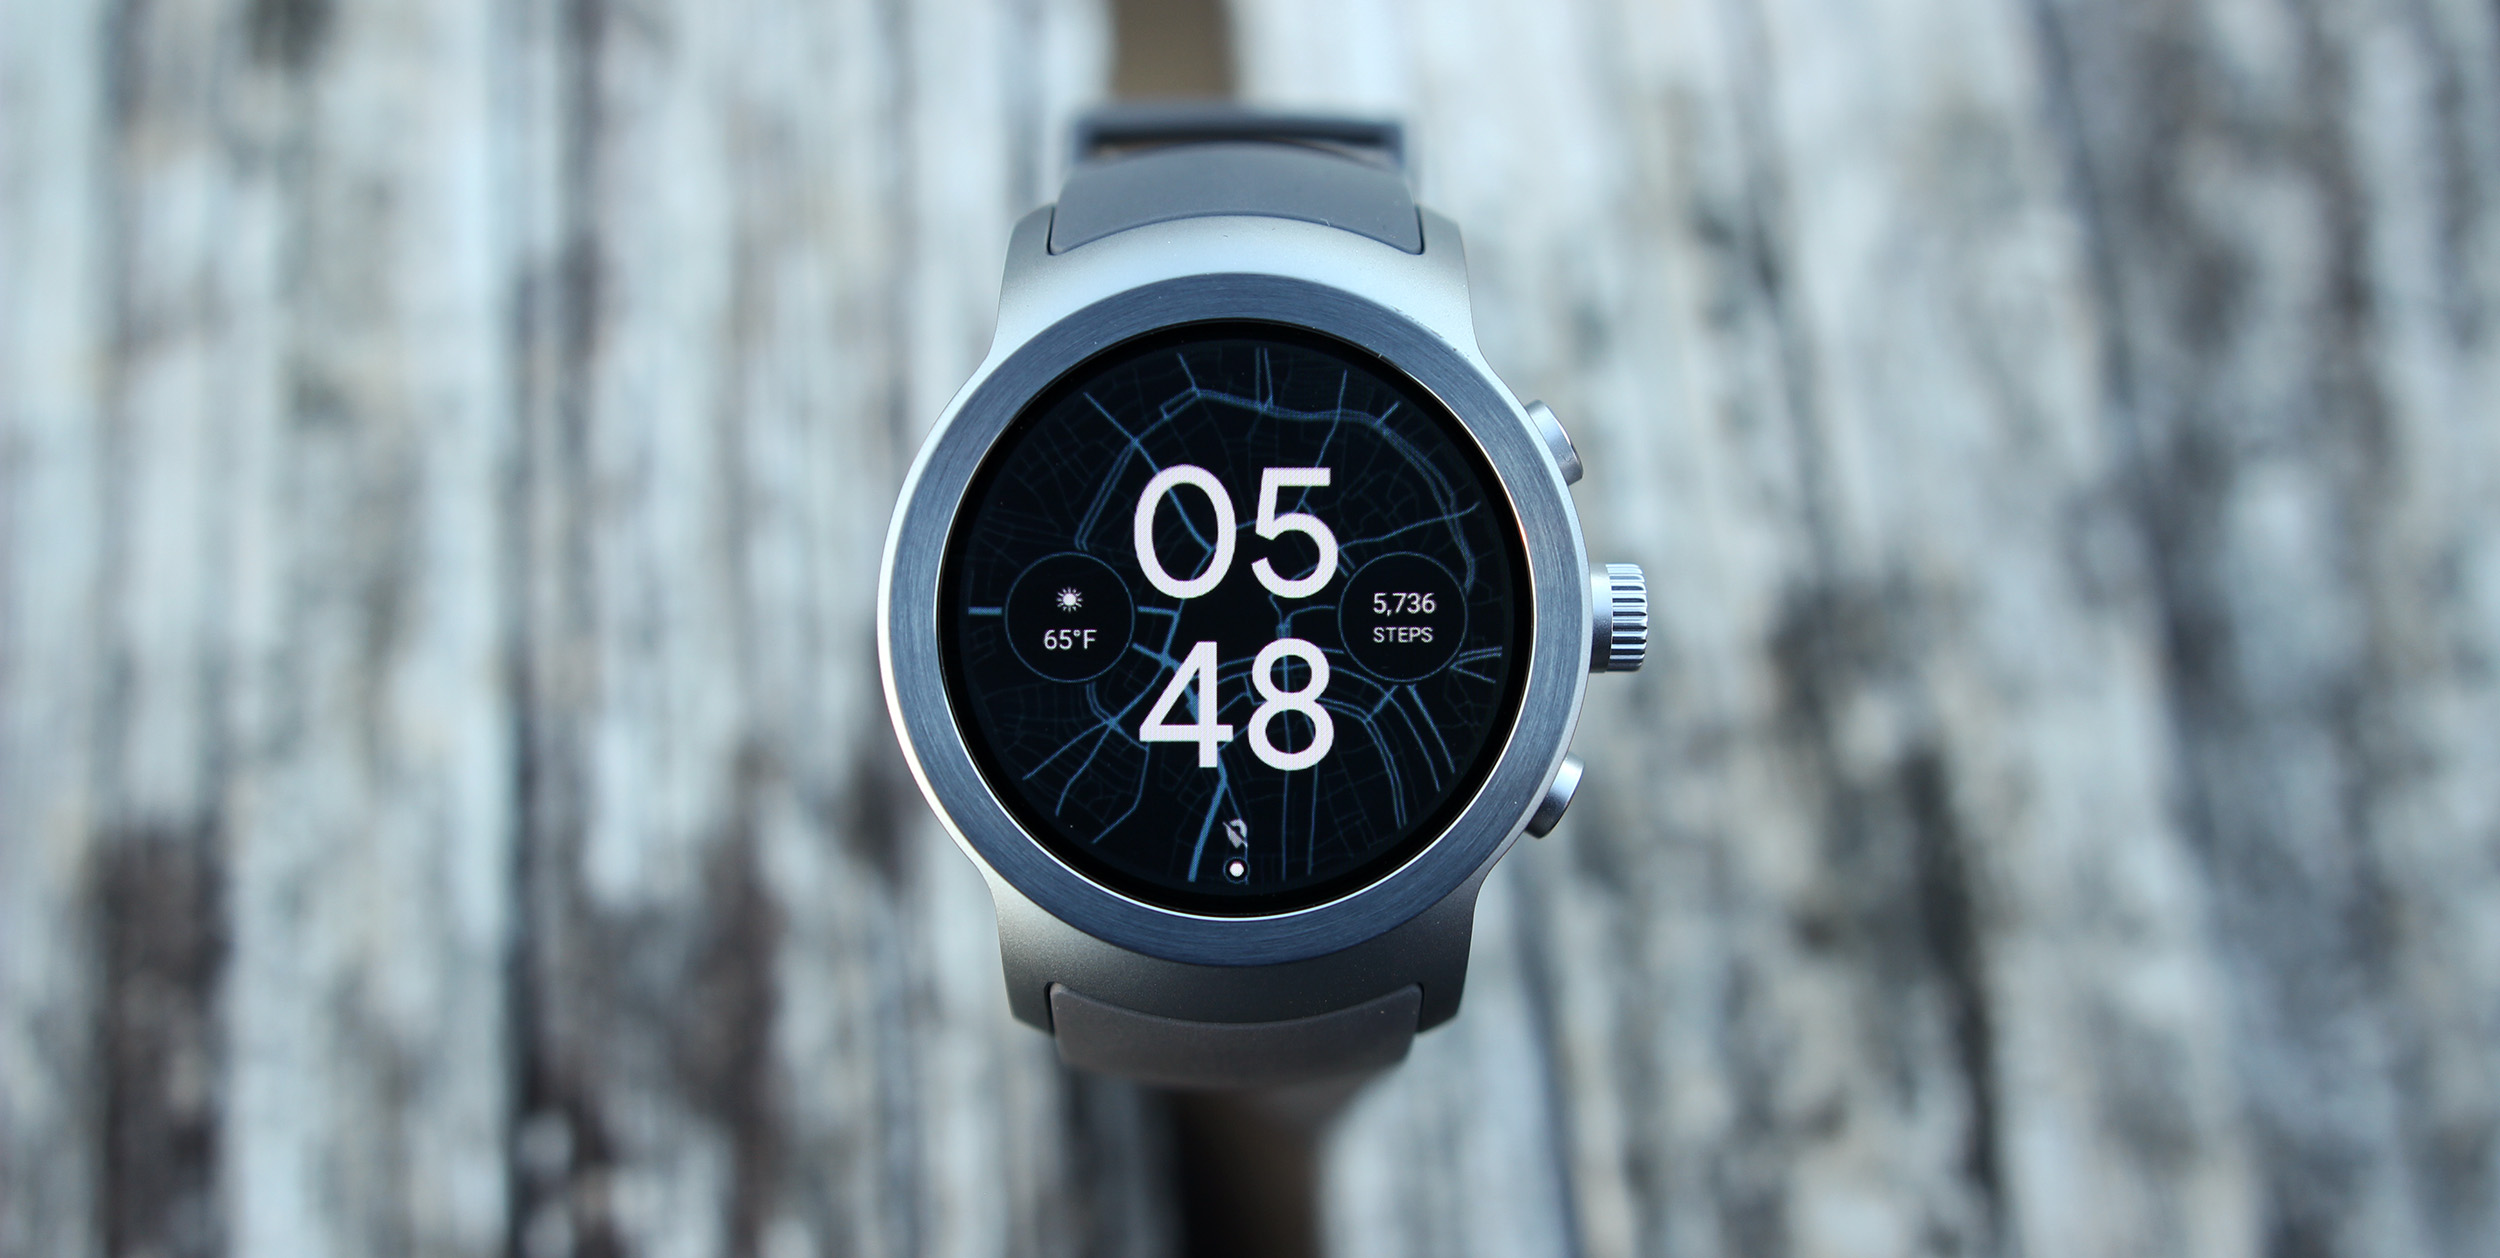 LG Watch Urbane 2nd Edition LTE (W200A) - Power device on or off - AT&T